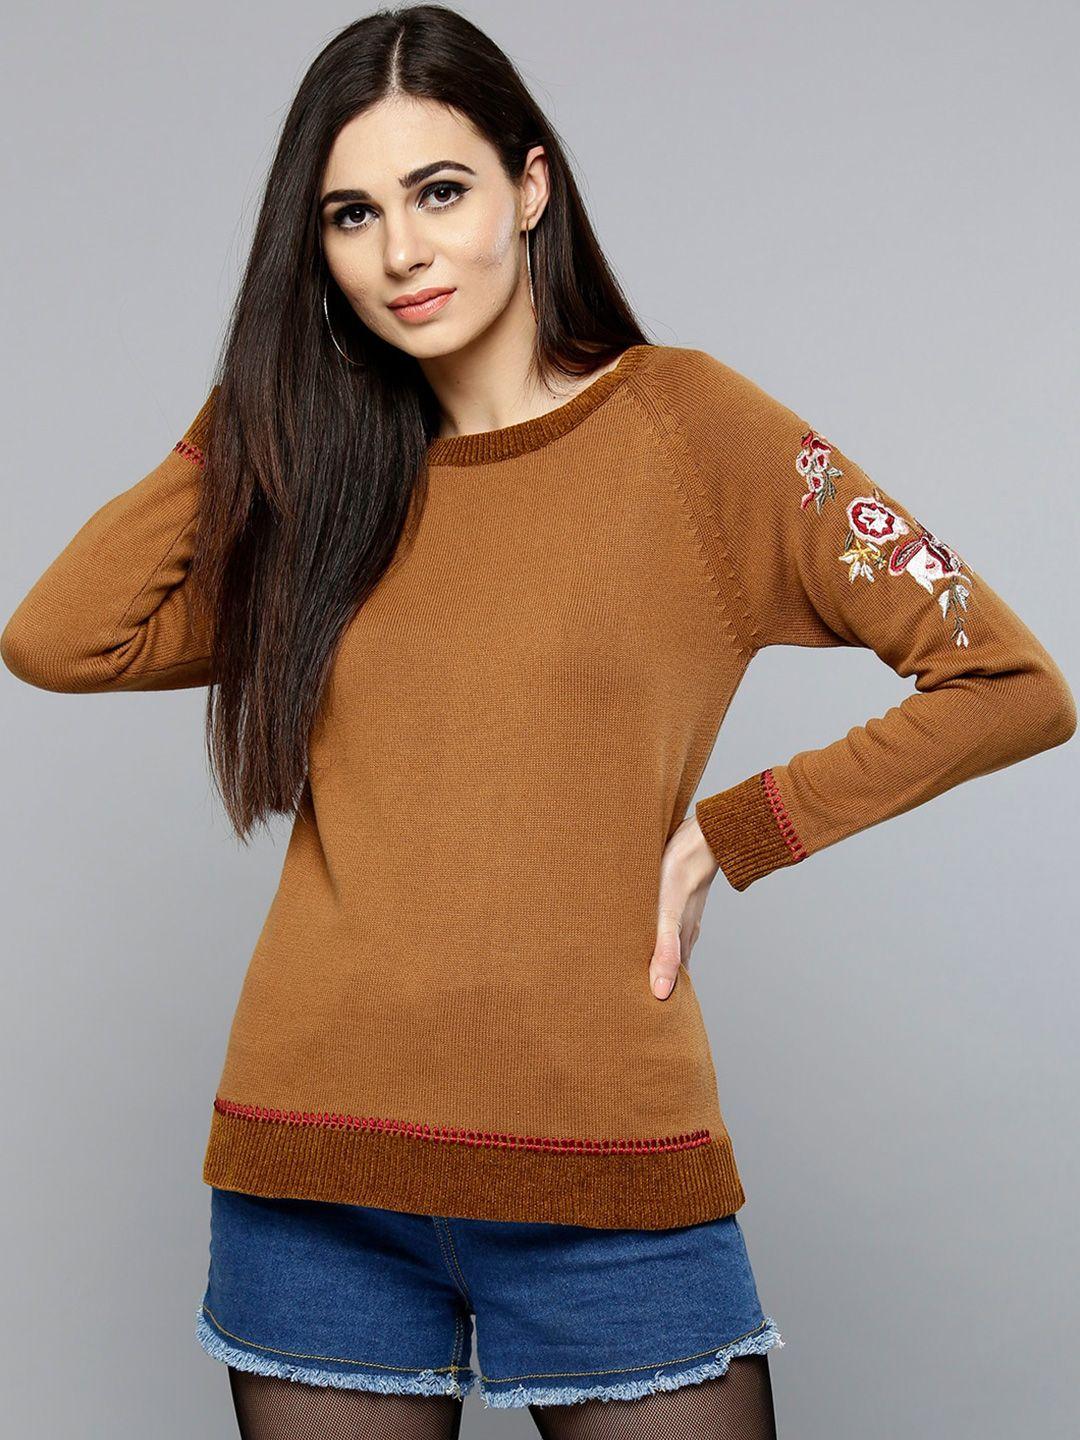 carlton-london-women-woollen-pullover-with-embroidered-detail